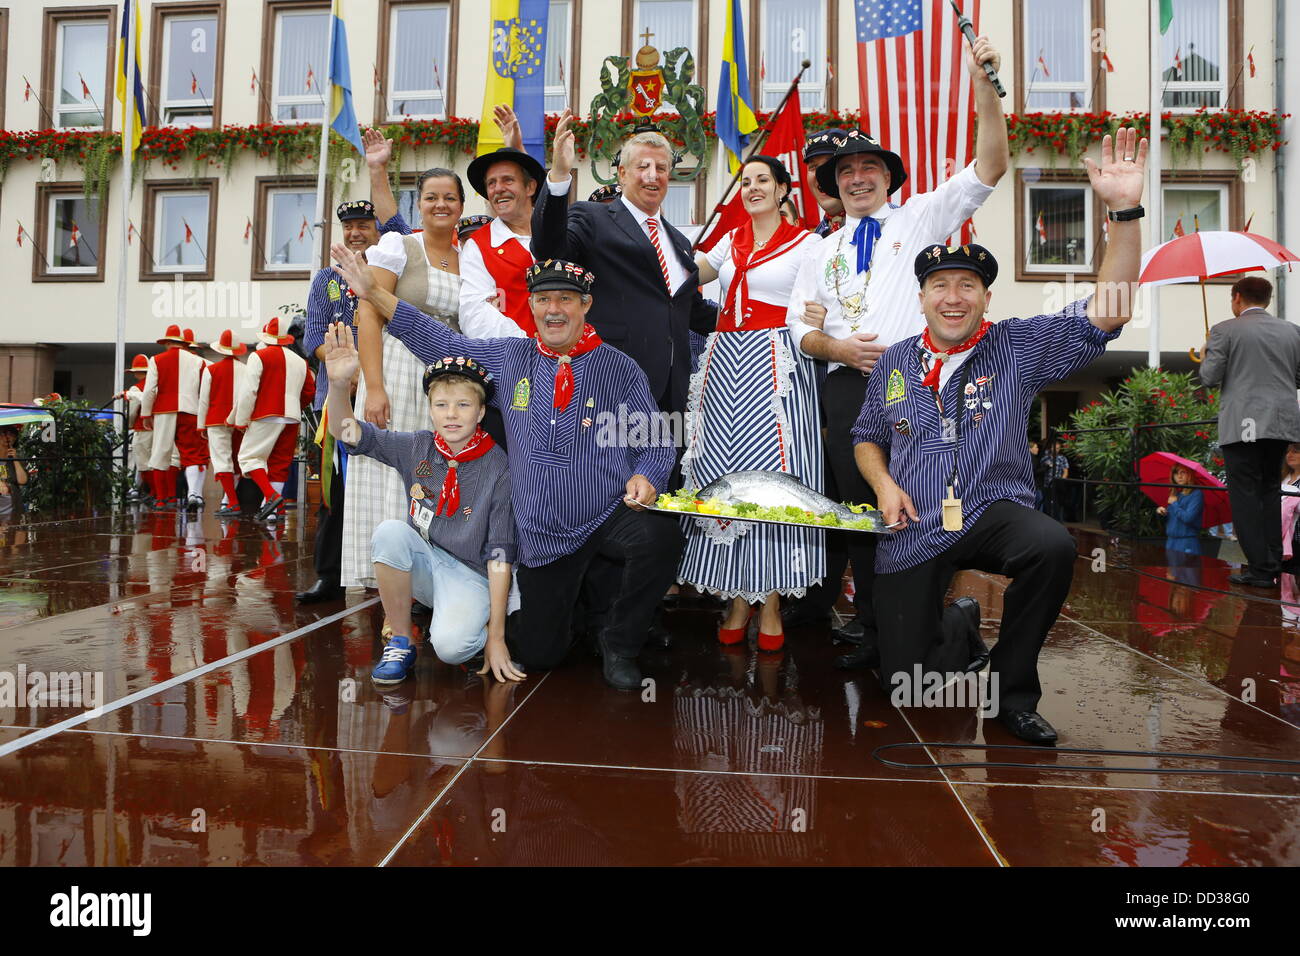 Worms, Germany. 25th August 2013. The Lord Mayor of Worms, Michael Kissel (4. R), the BojemŠŠschter vun de FischerwŠŠd (mayor of the fishermenÕs lea), Markus Trapp (2. R) and his bride Jana Berger (3. R) are pictured together with representatives of the old fishermen's Guild of Worms. The largest wine fair along the Rhine, the Backfischfest, started its 80th anniversary in  Worms with the traditional handing over of power from the Lord Mayor to the mayor of the fishermenÕs lea. The ceremony included dances and music. Credit:  Michael Debets/Alamy Live News Stock Photo